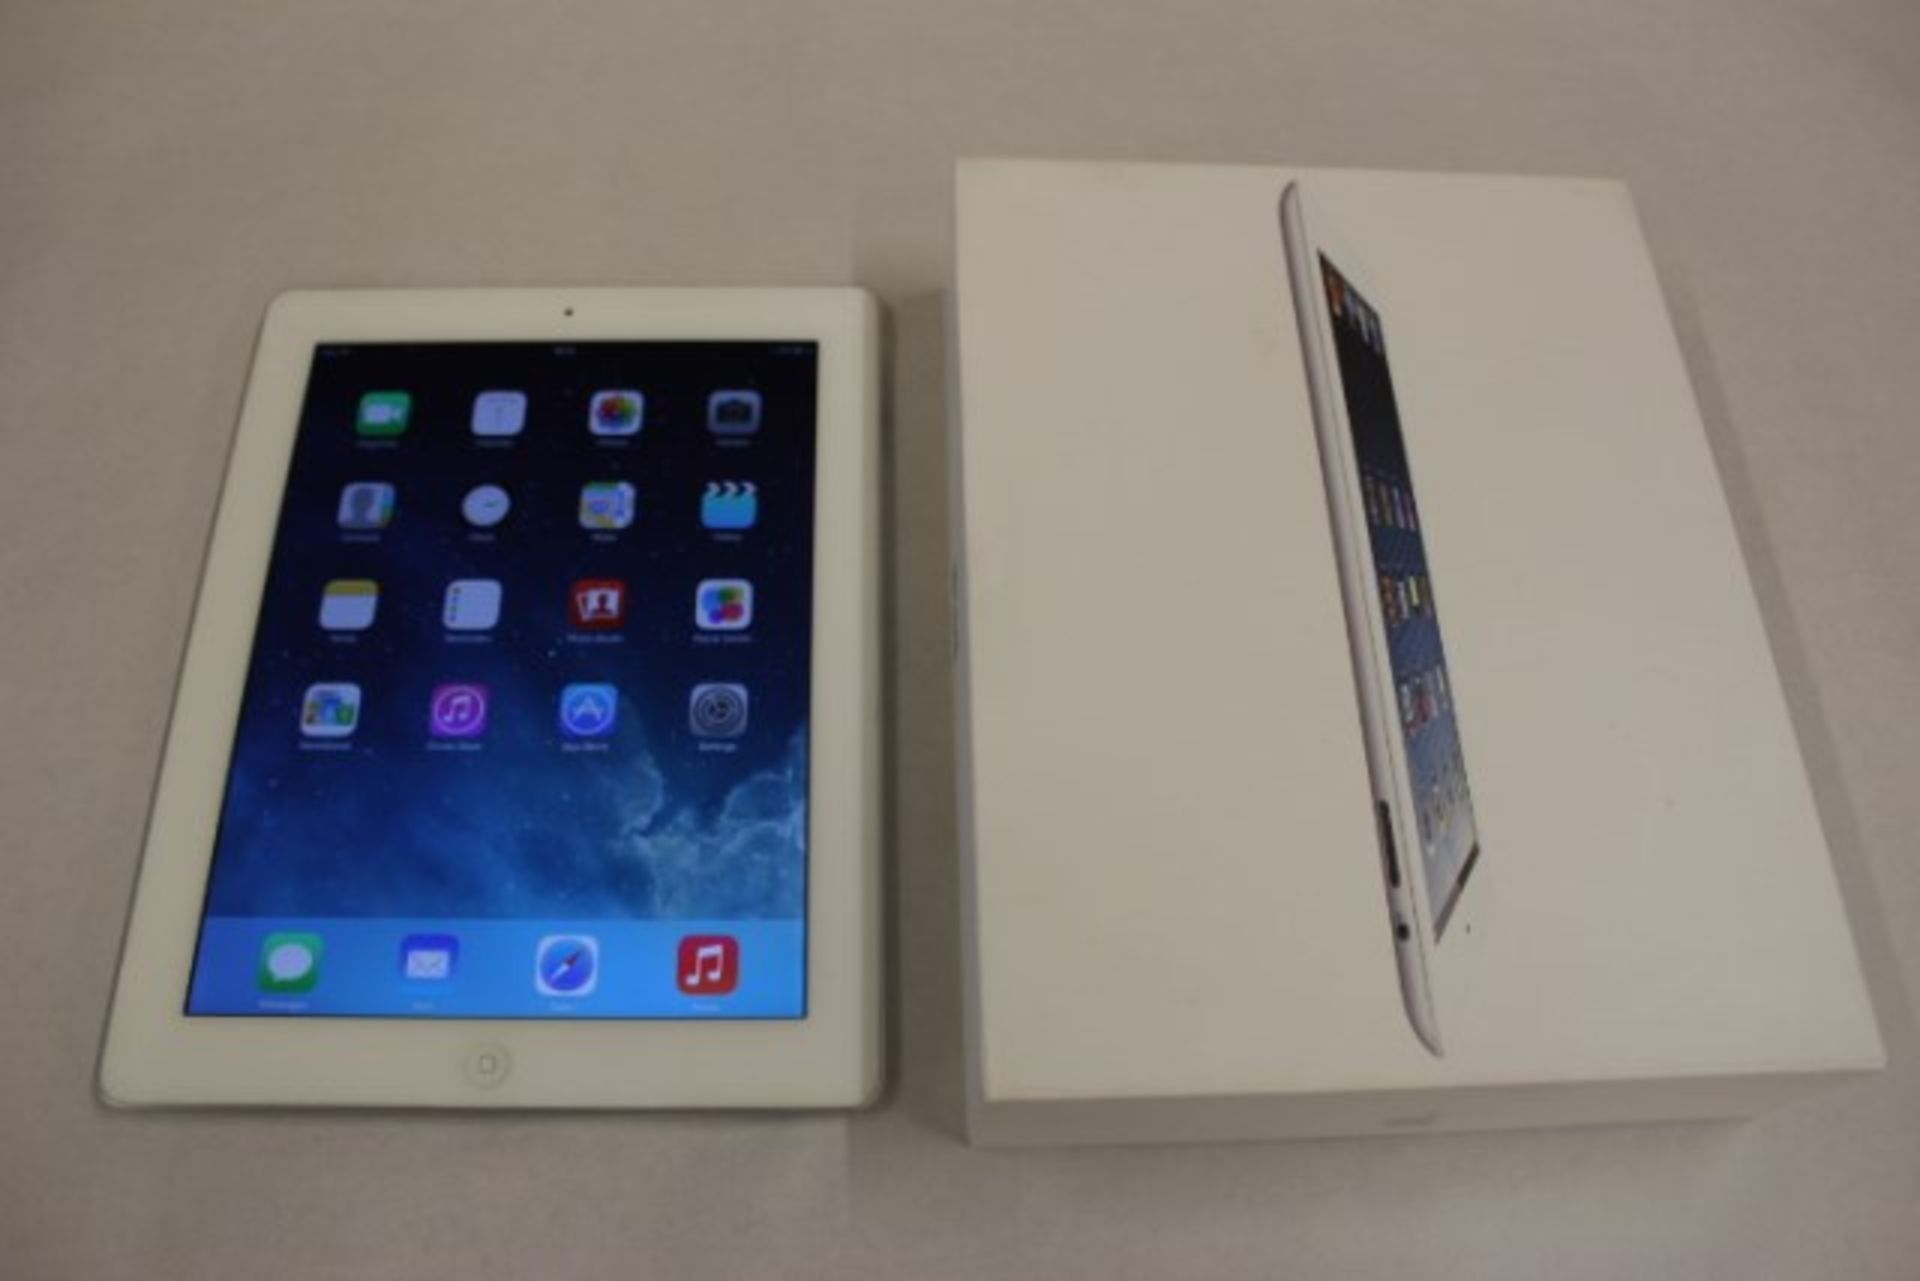 V  Grade B iPad 4 16Gb Black With Two Cameras/Retina Display With Charger In Original Box - - Image 2 of 2